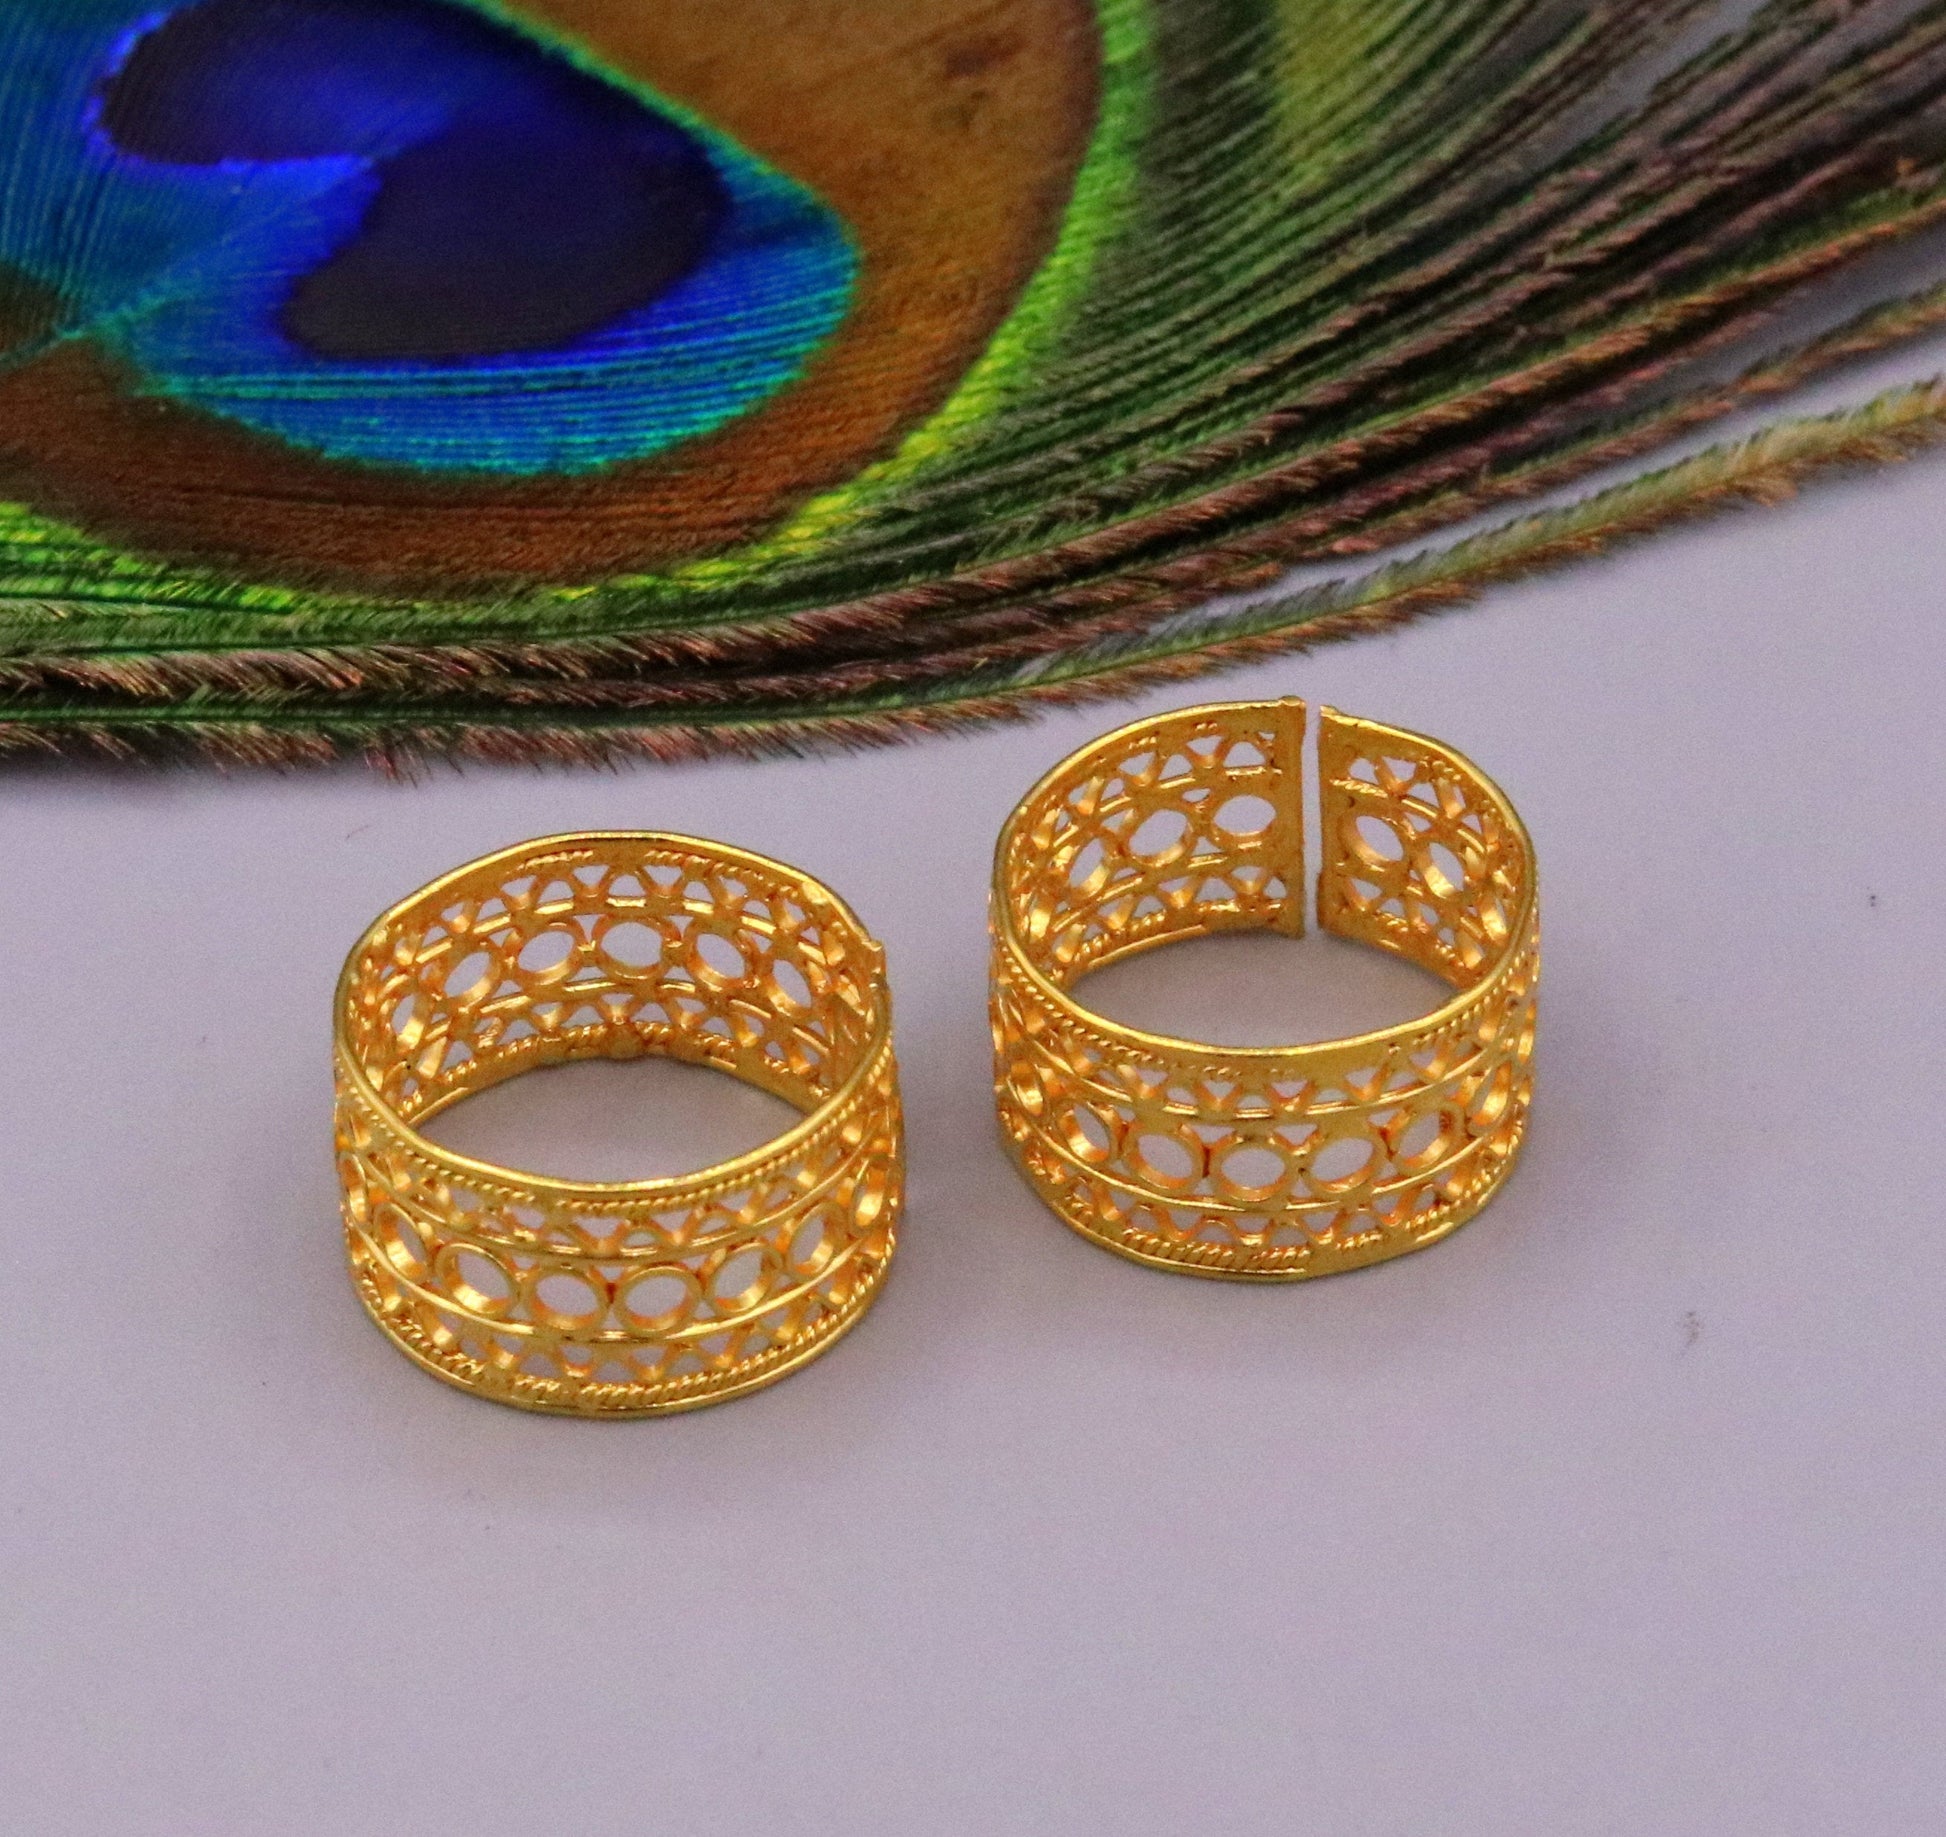 Vintage antique design 20 karat yellow gold handmade fabulous Toe ring pair excellent wedding anniversary jewelry from india - TRIBAL ORNAMENTS